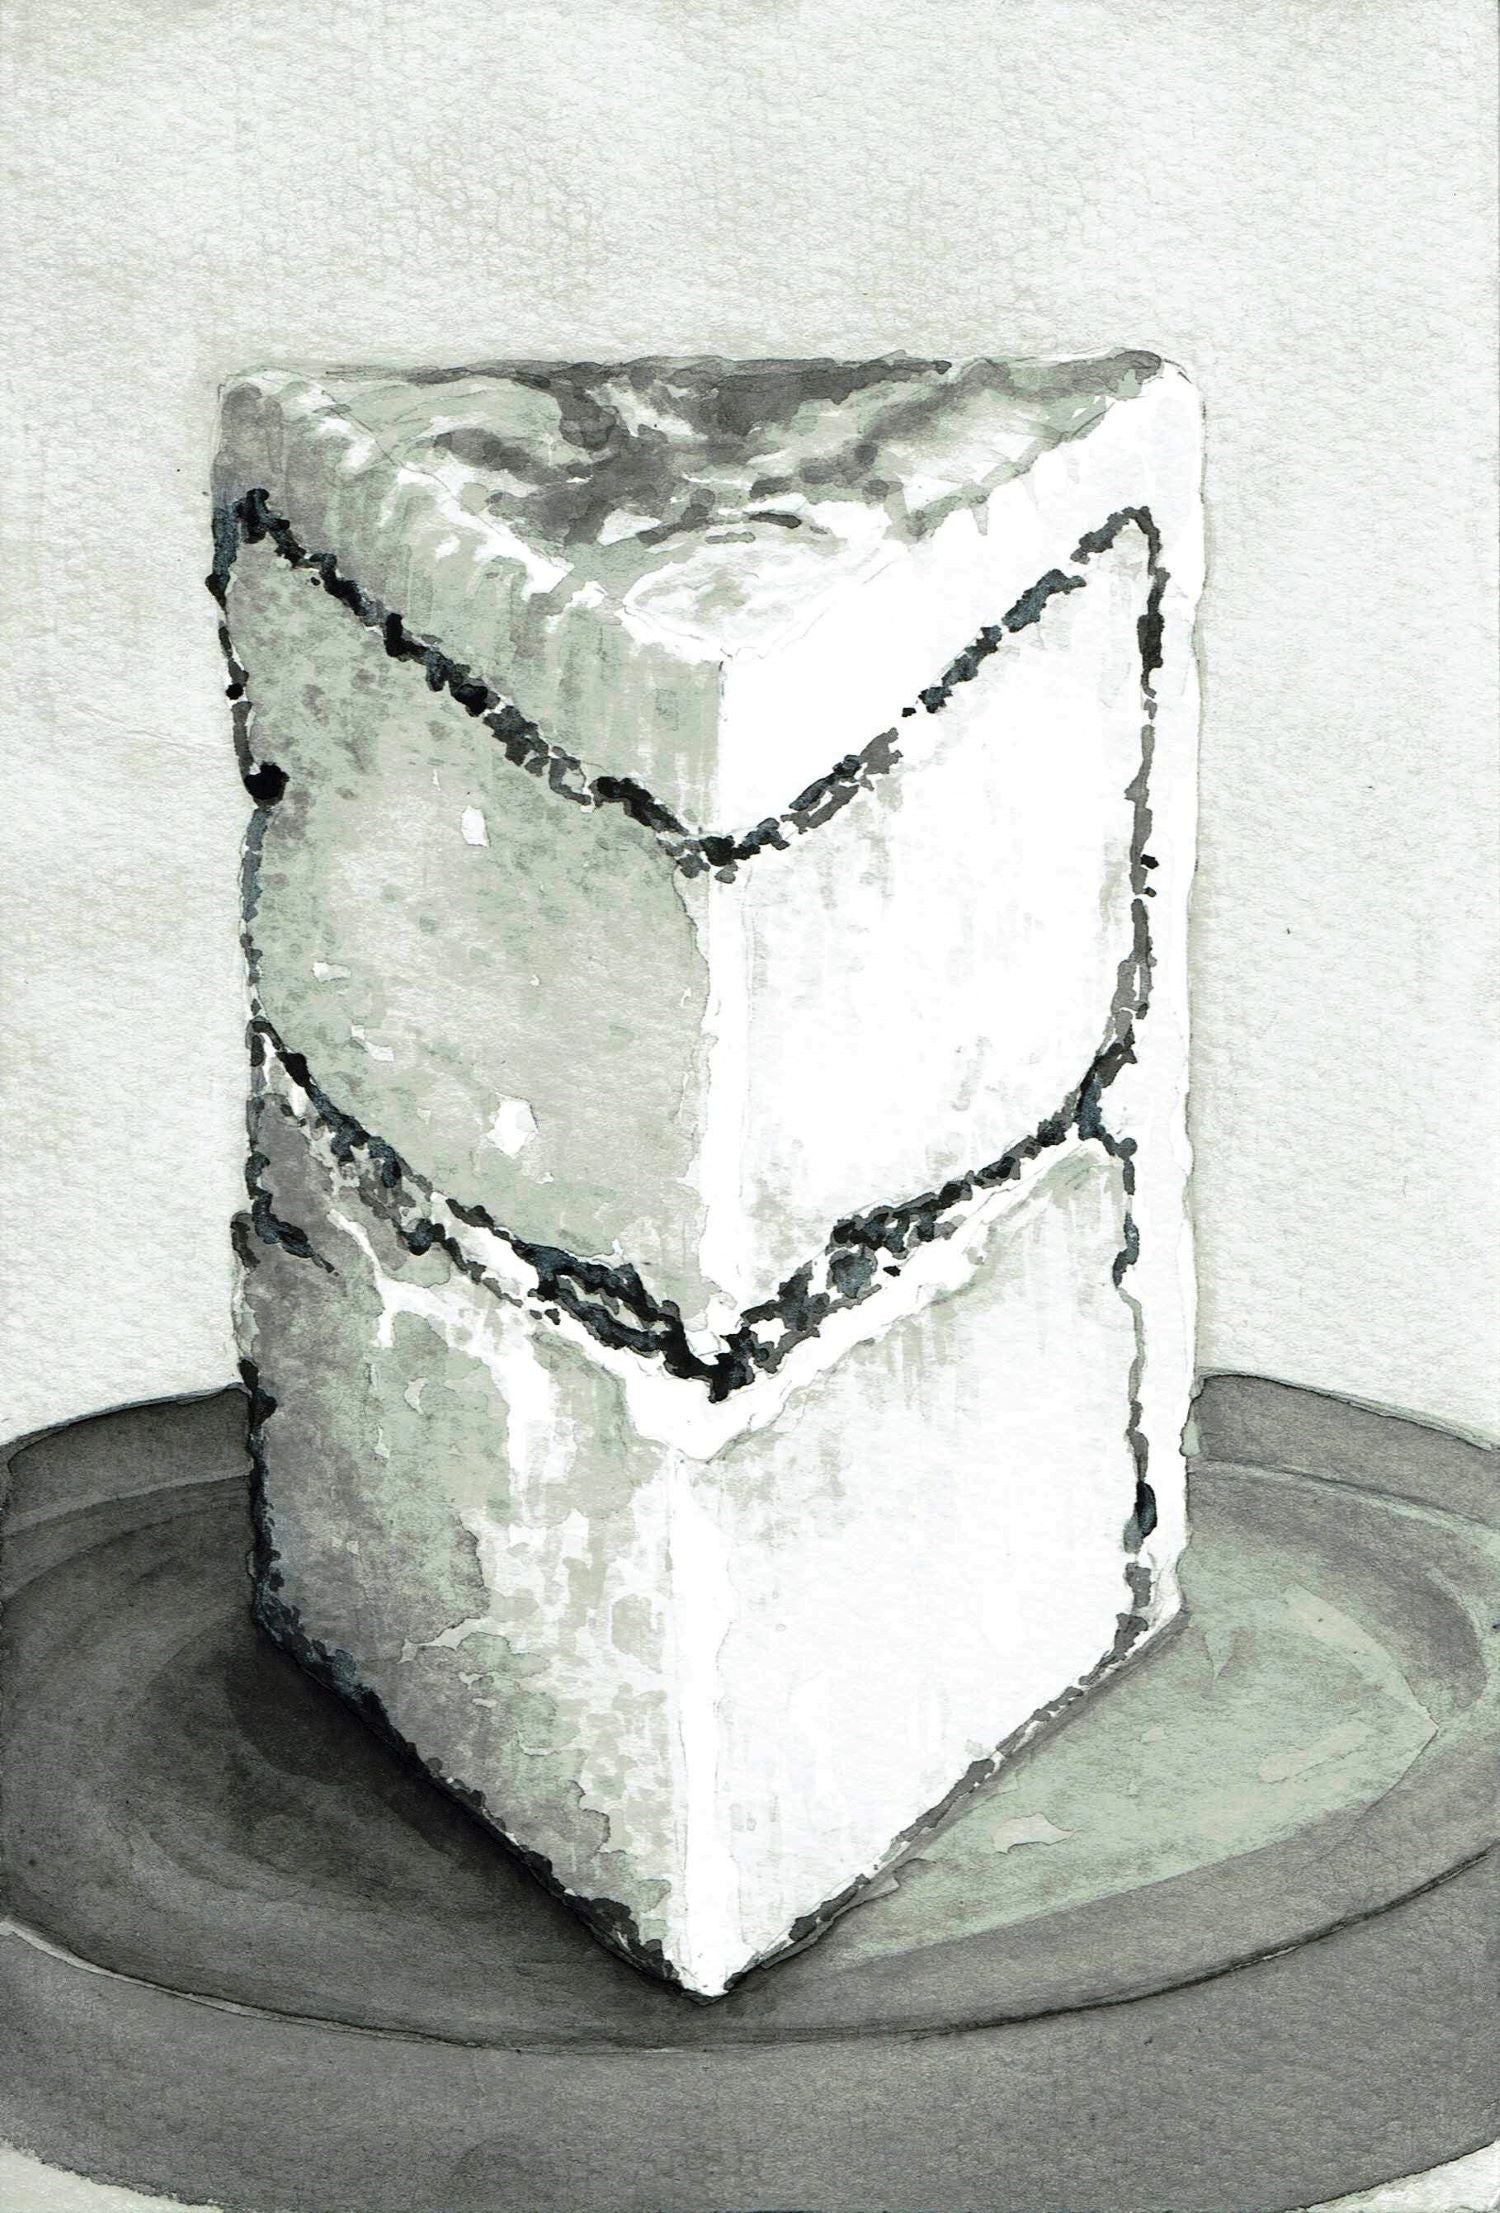 White cake watercolor painting